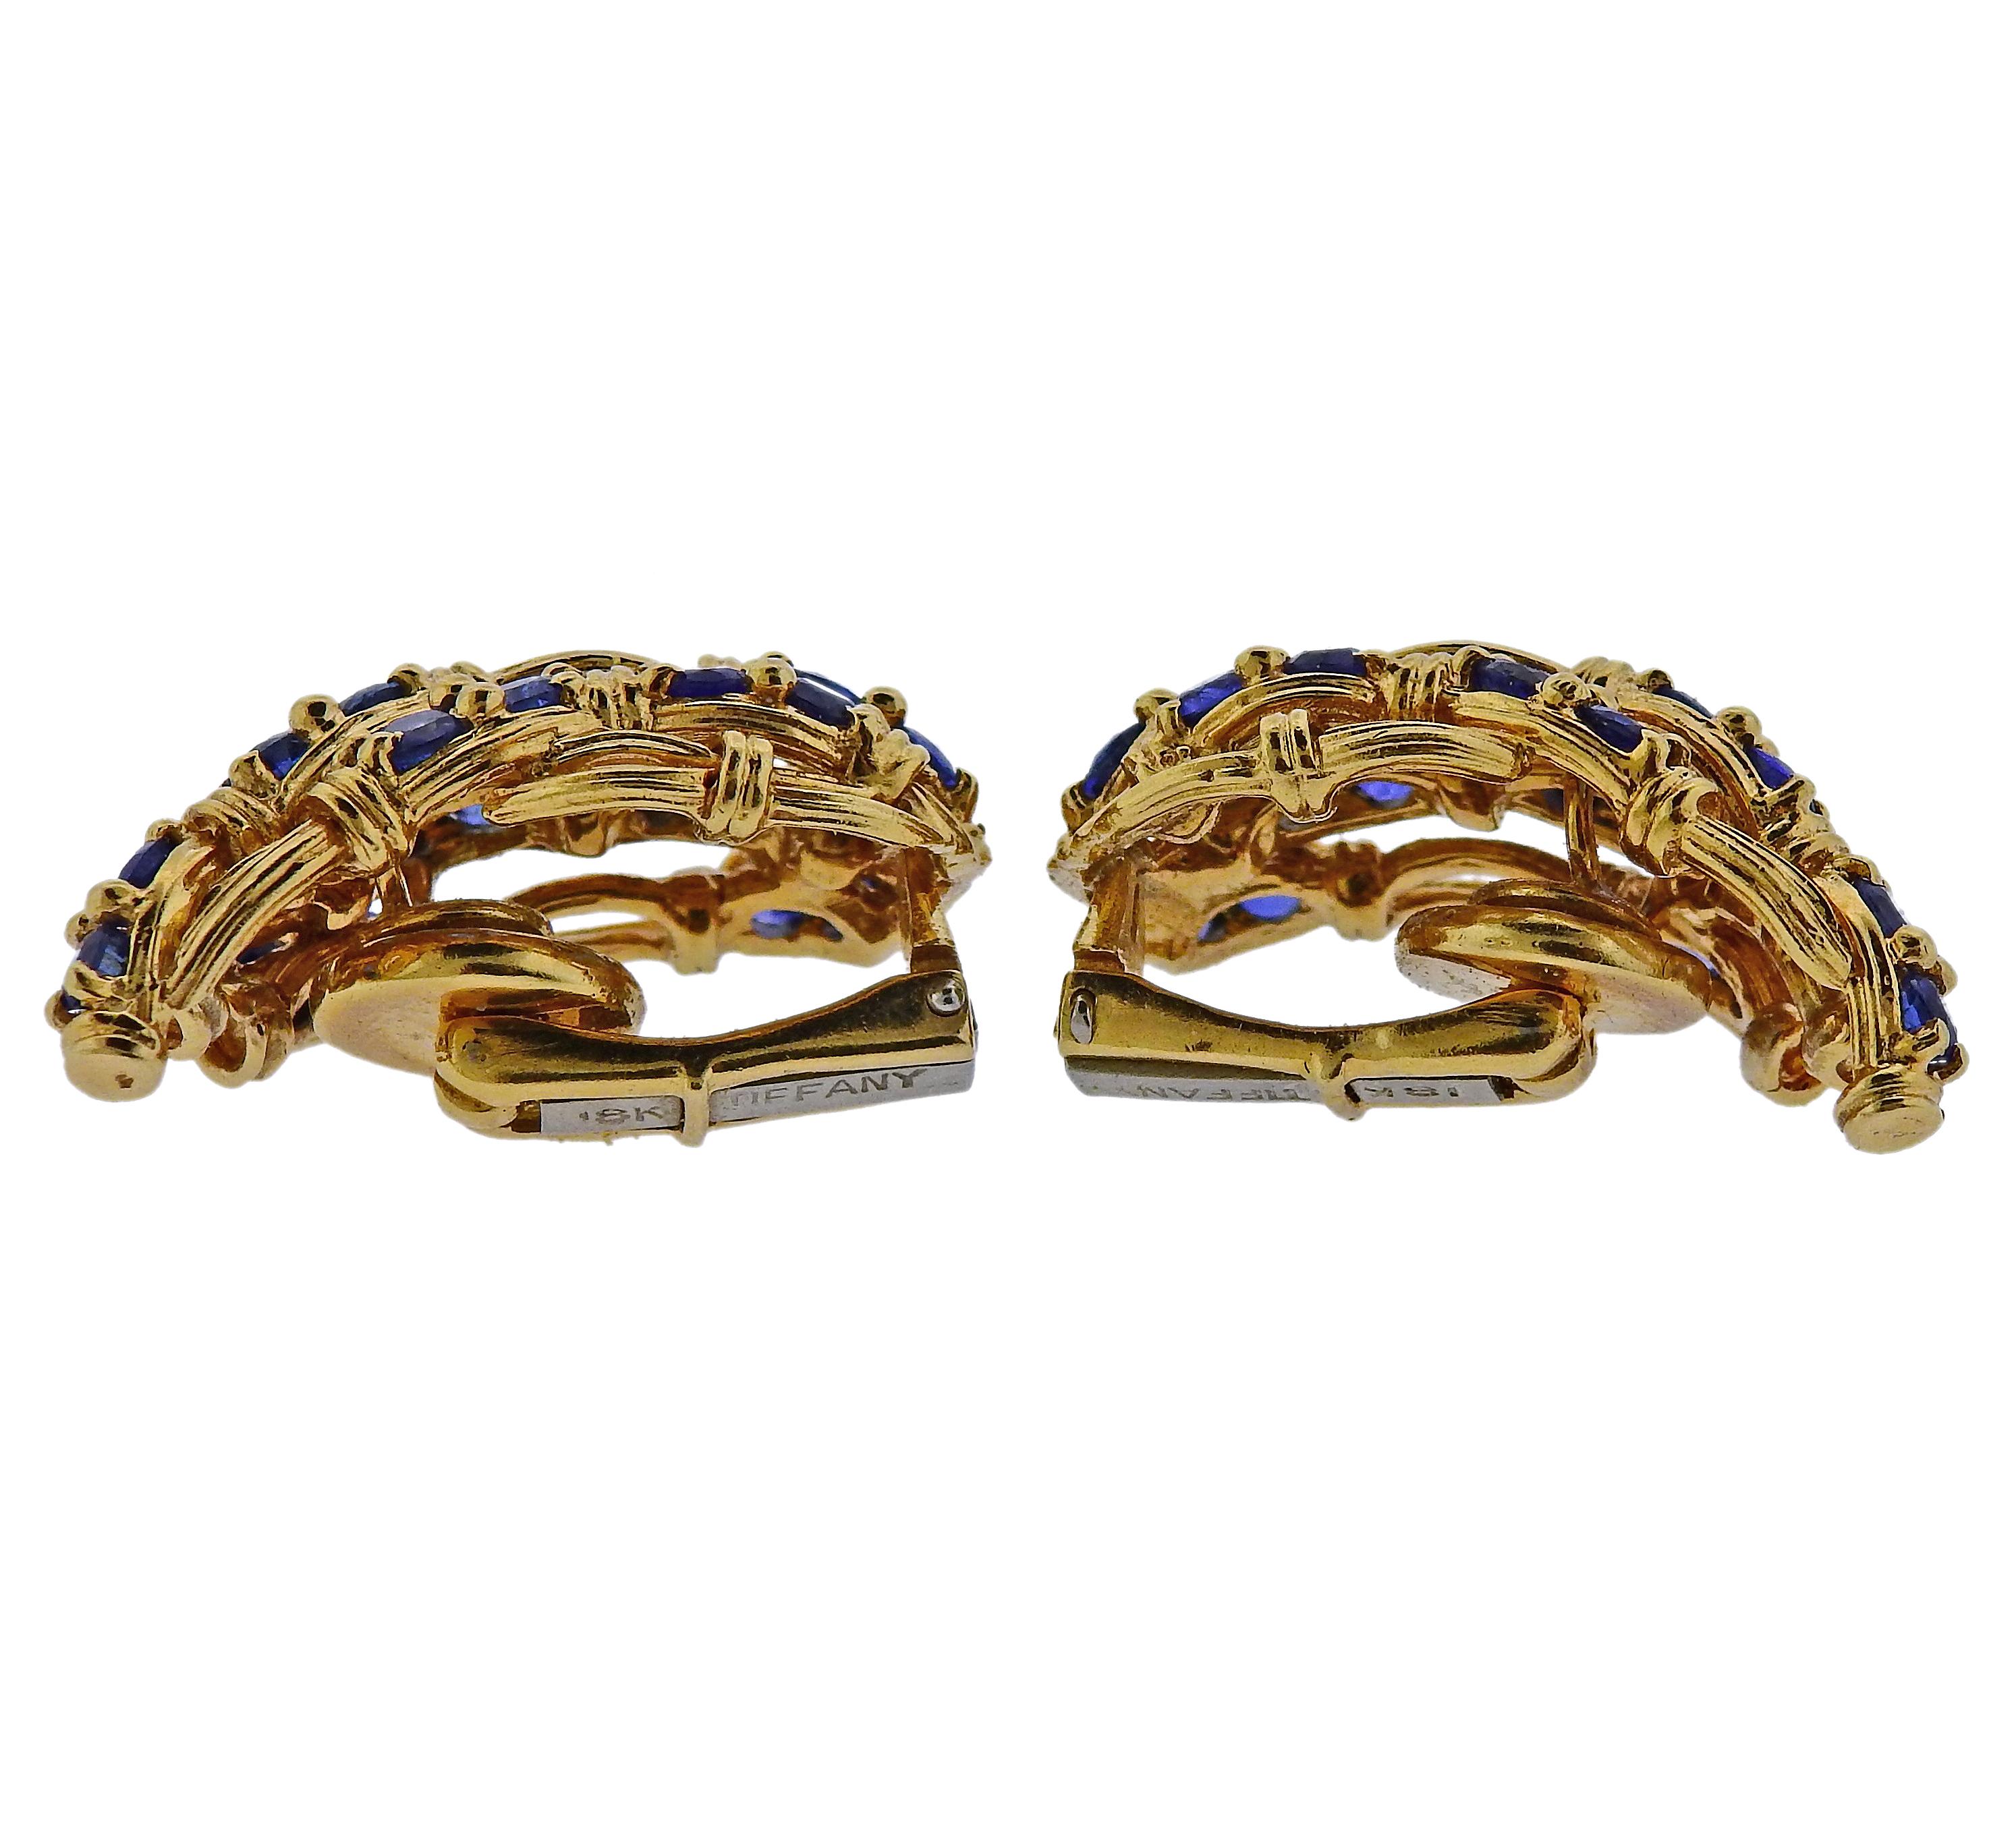 A pair of vintage 18k yellow gold earrings by Tiffany & Co, set with blue sapphires. Earrings are 29mm x 16mm and weigh 24.8 grams. Marked Tiffany 18k. 